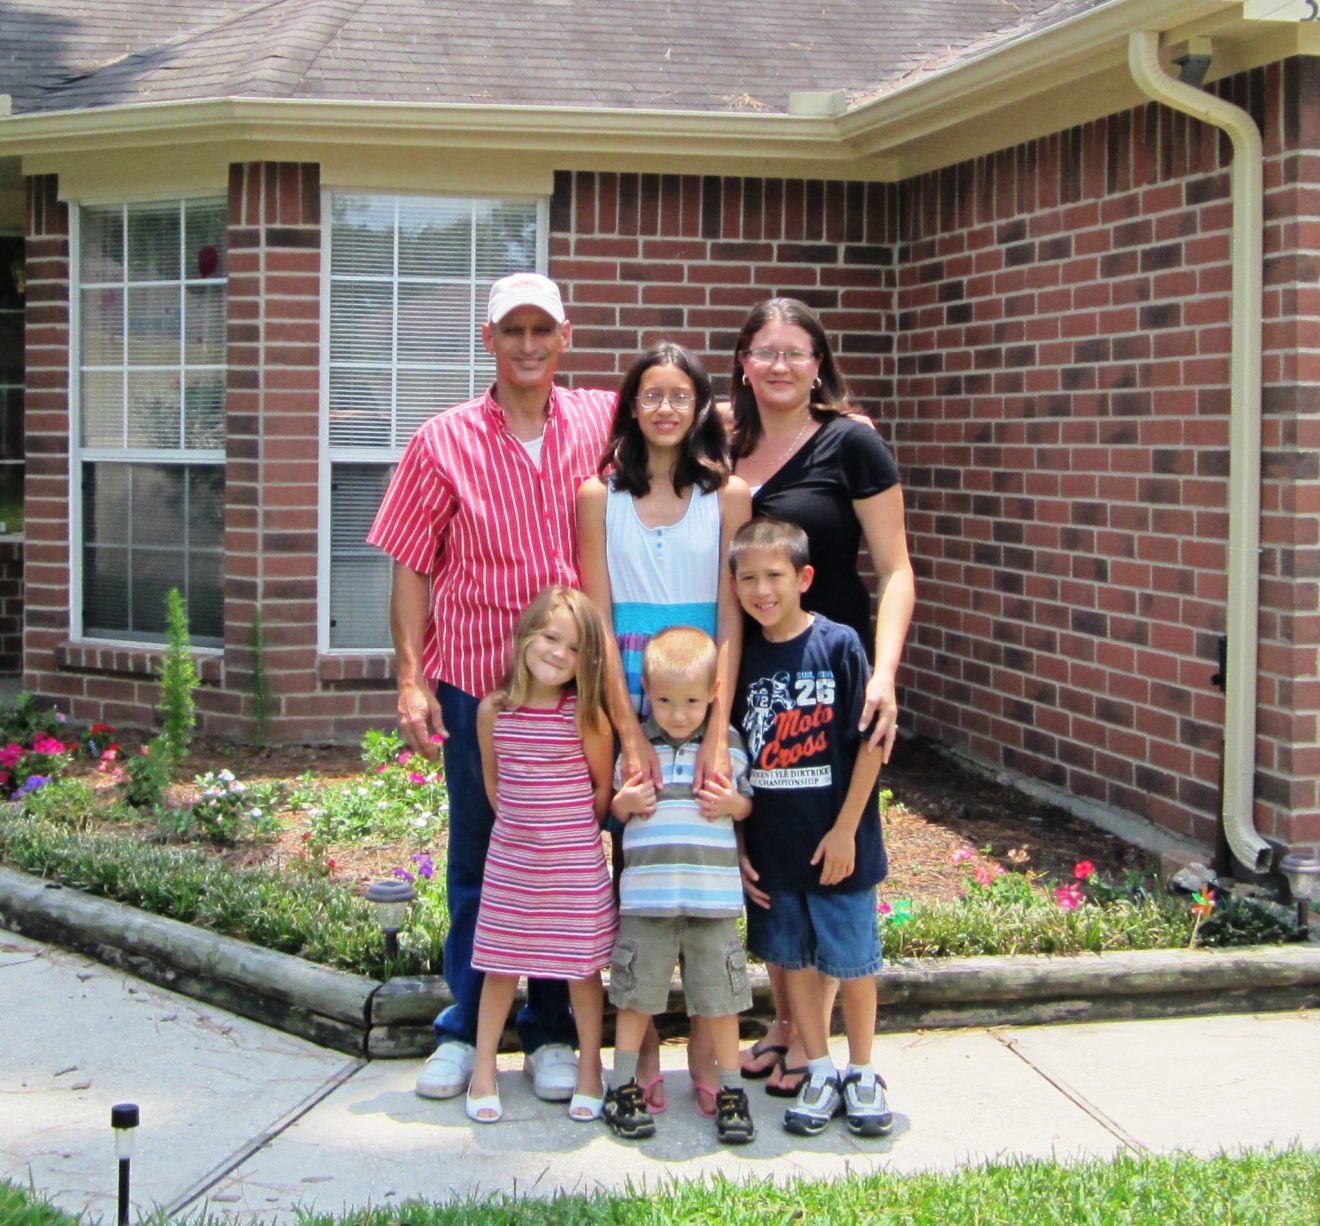 The Bailey family standing in front of their new home.